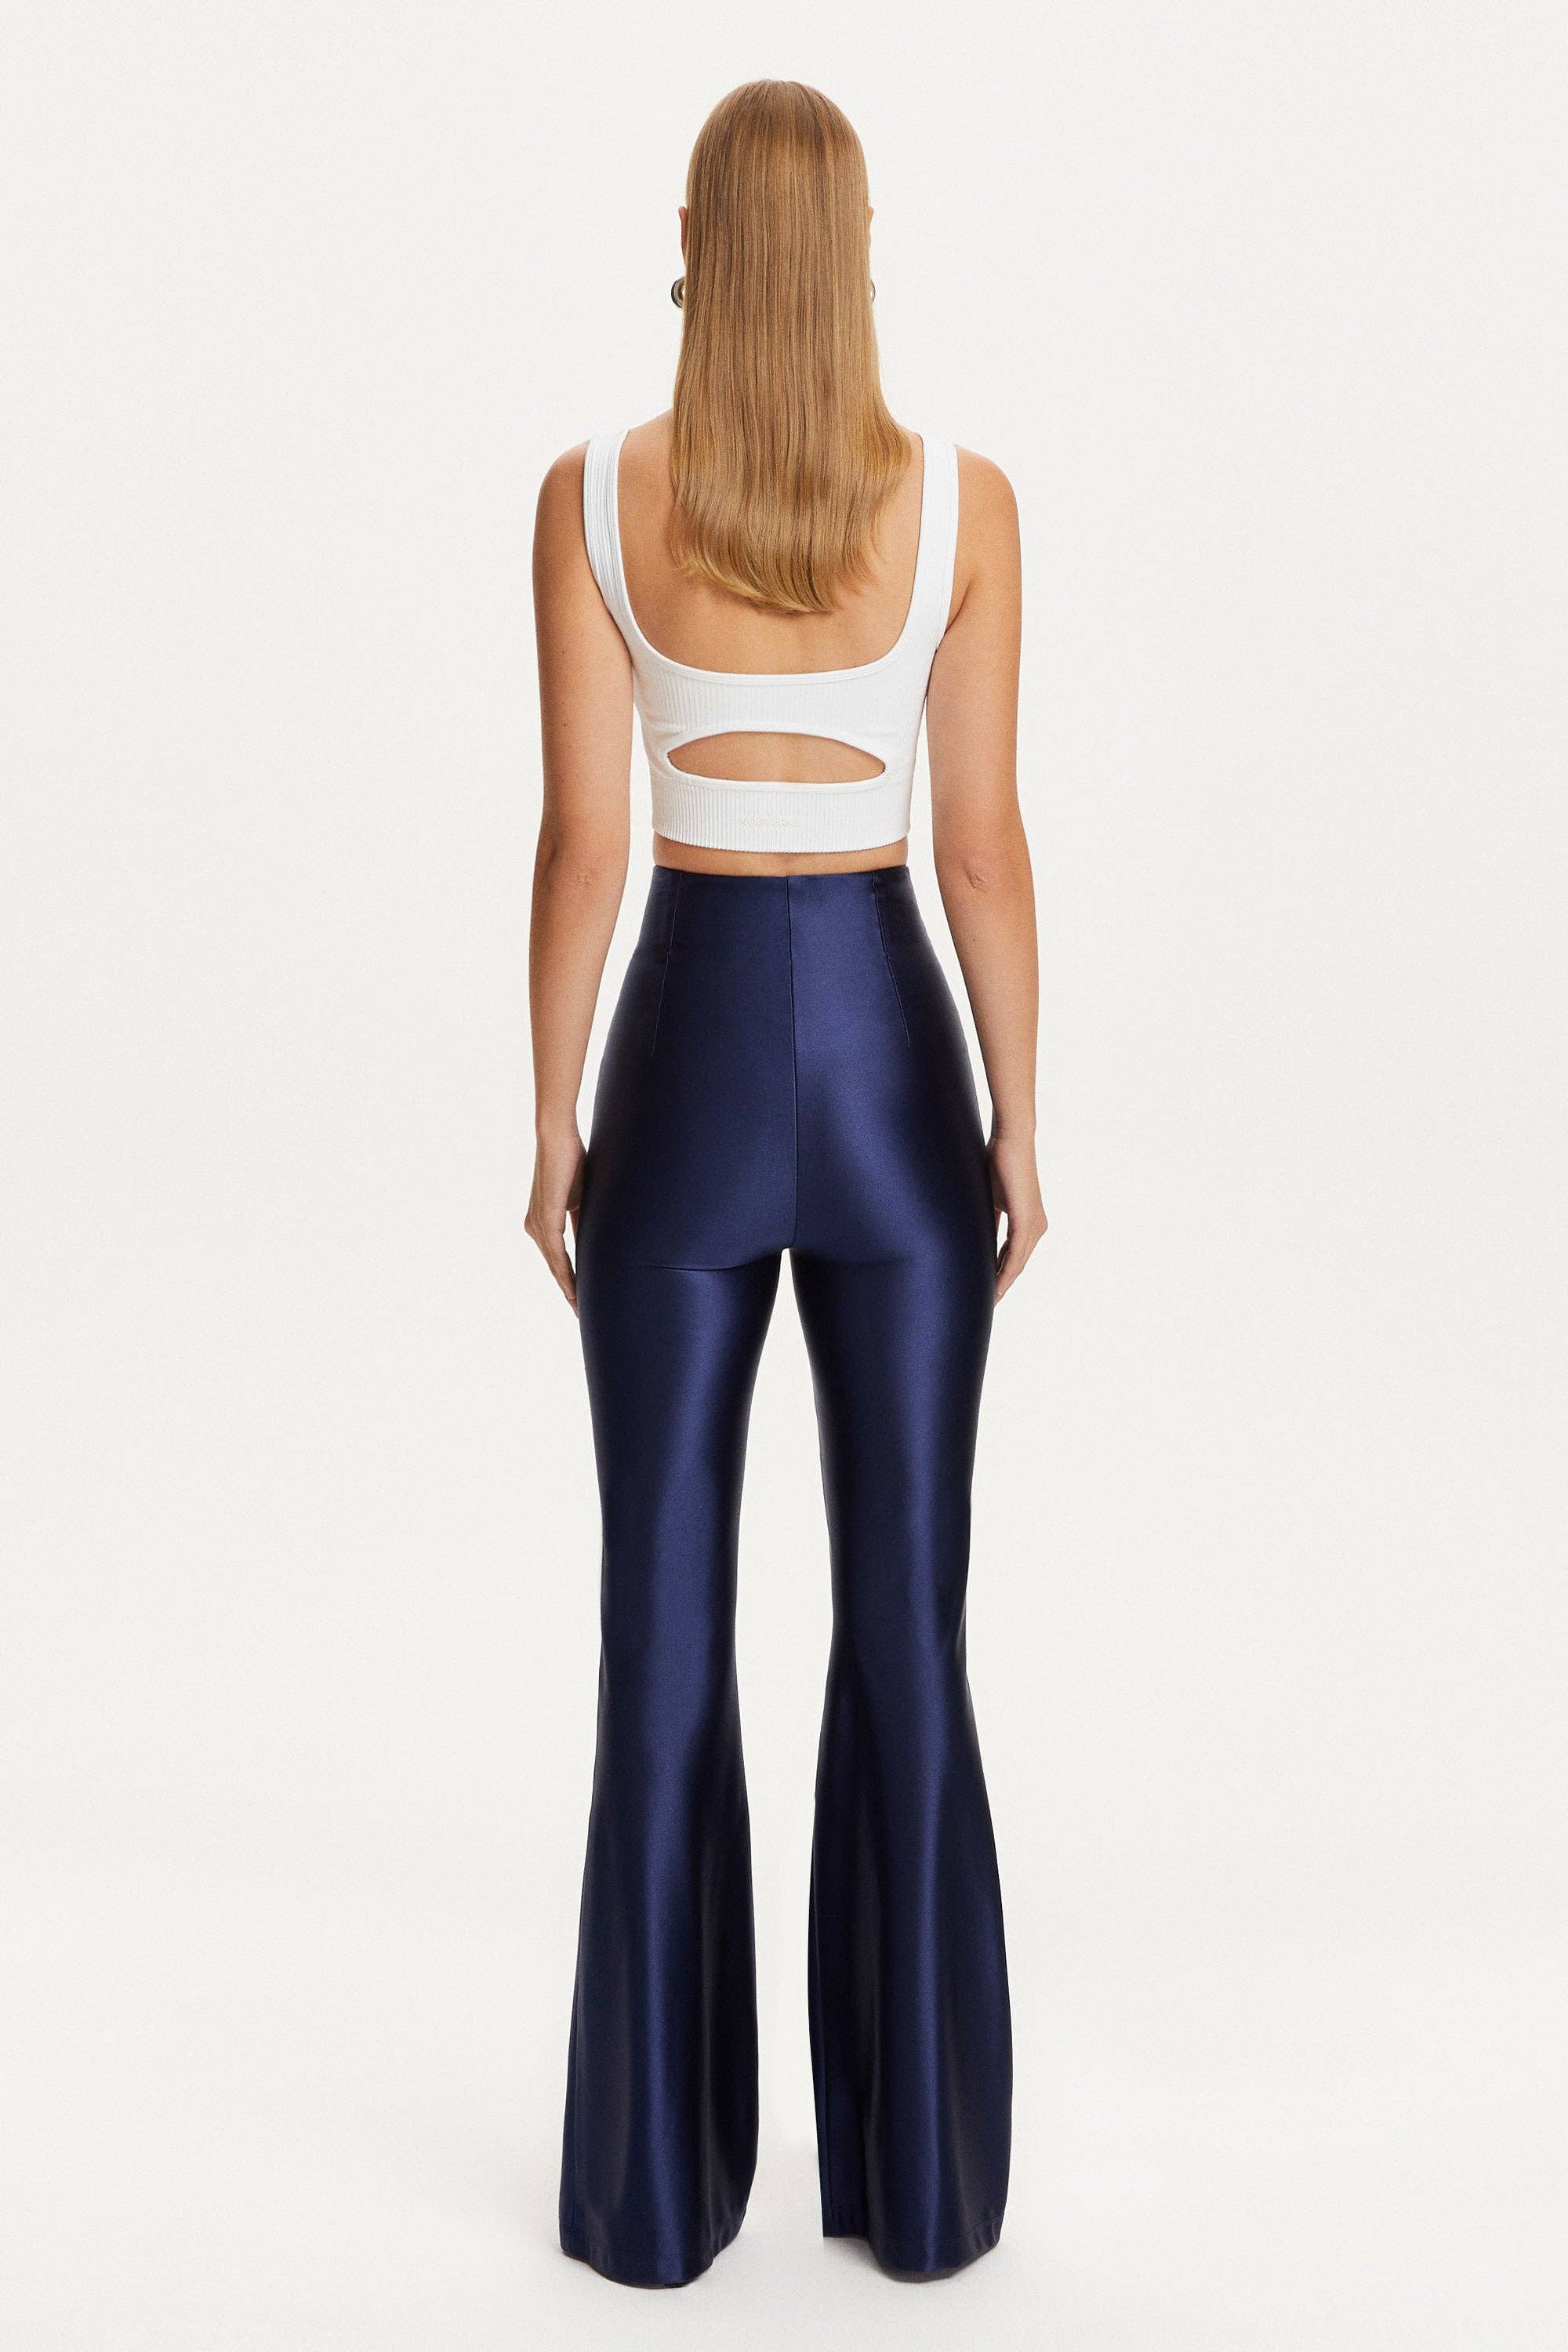 Darted Flare Pants: XL / Navy Blue